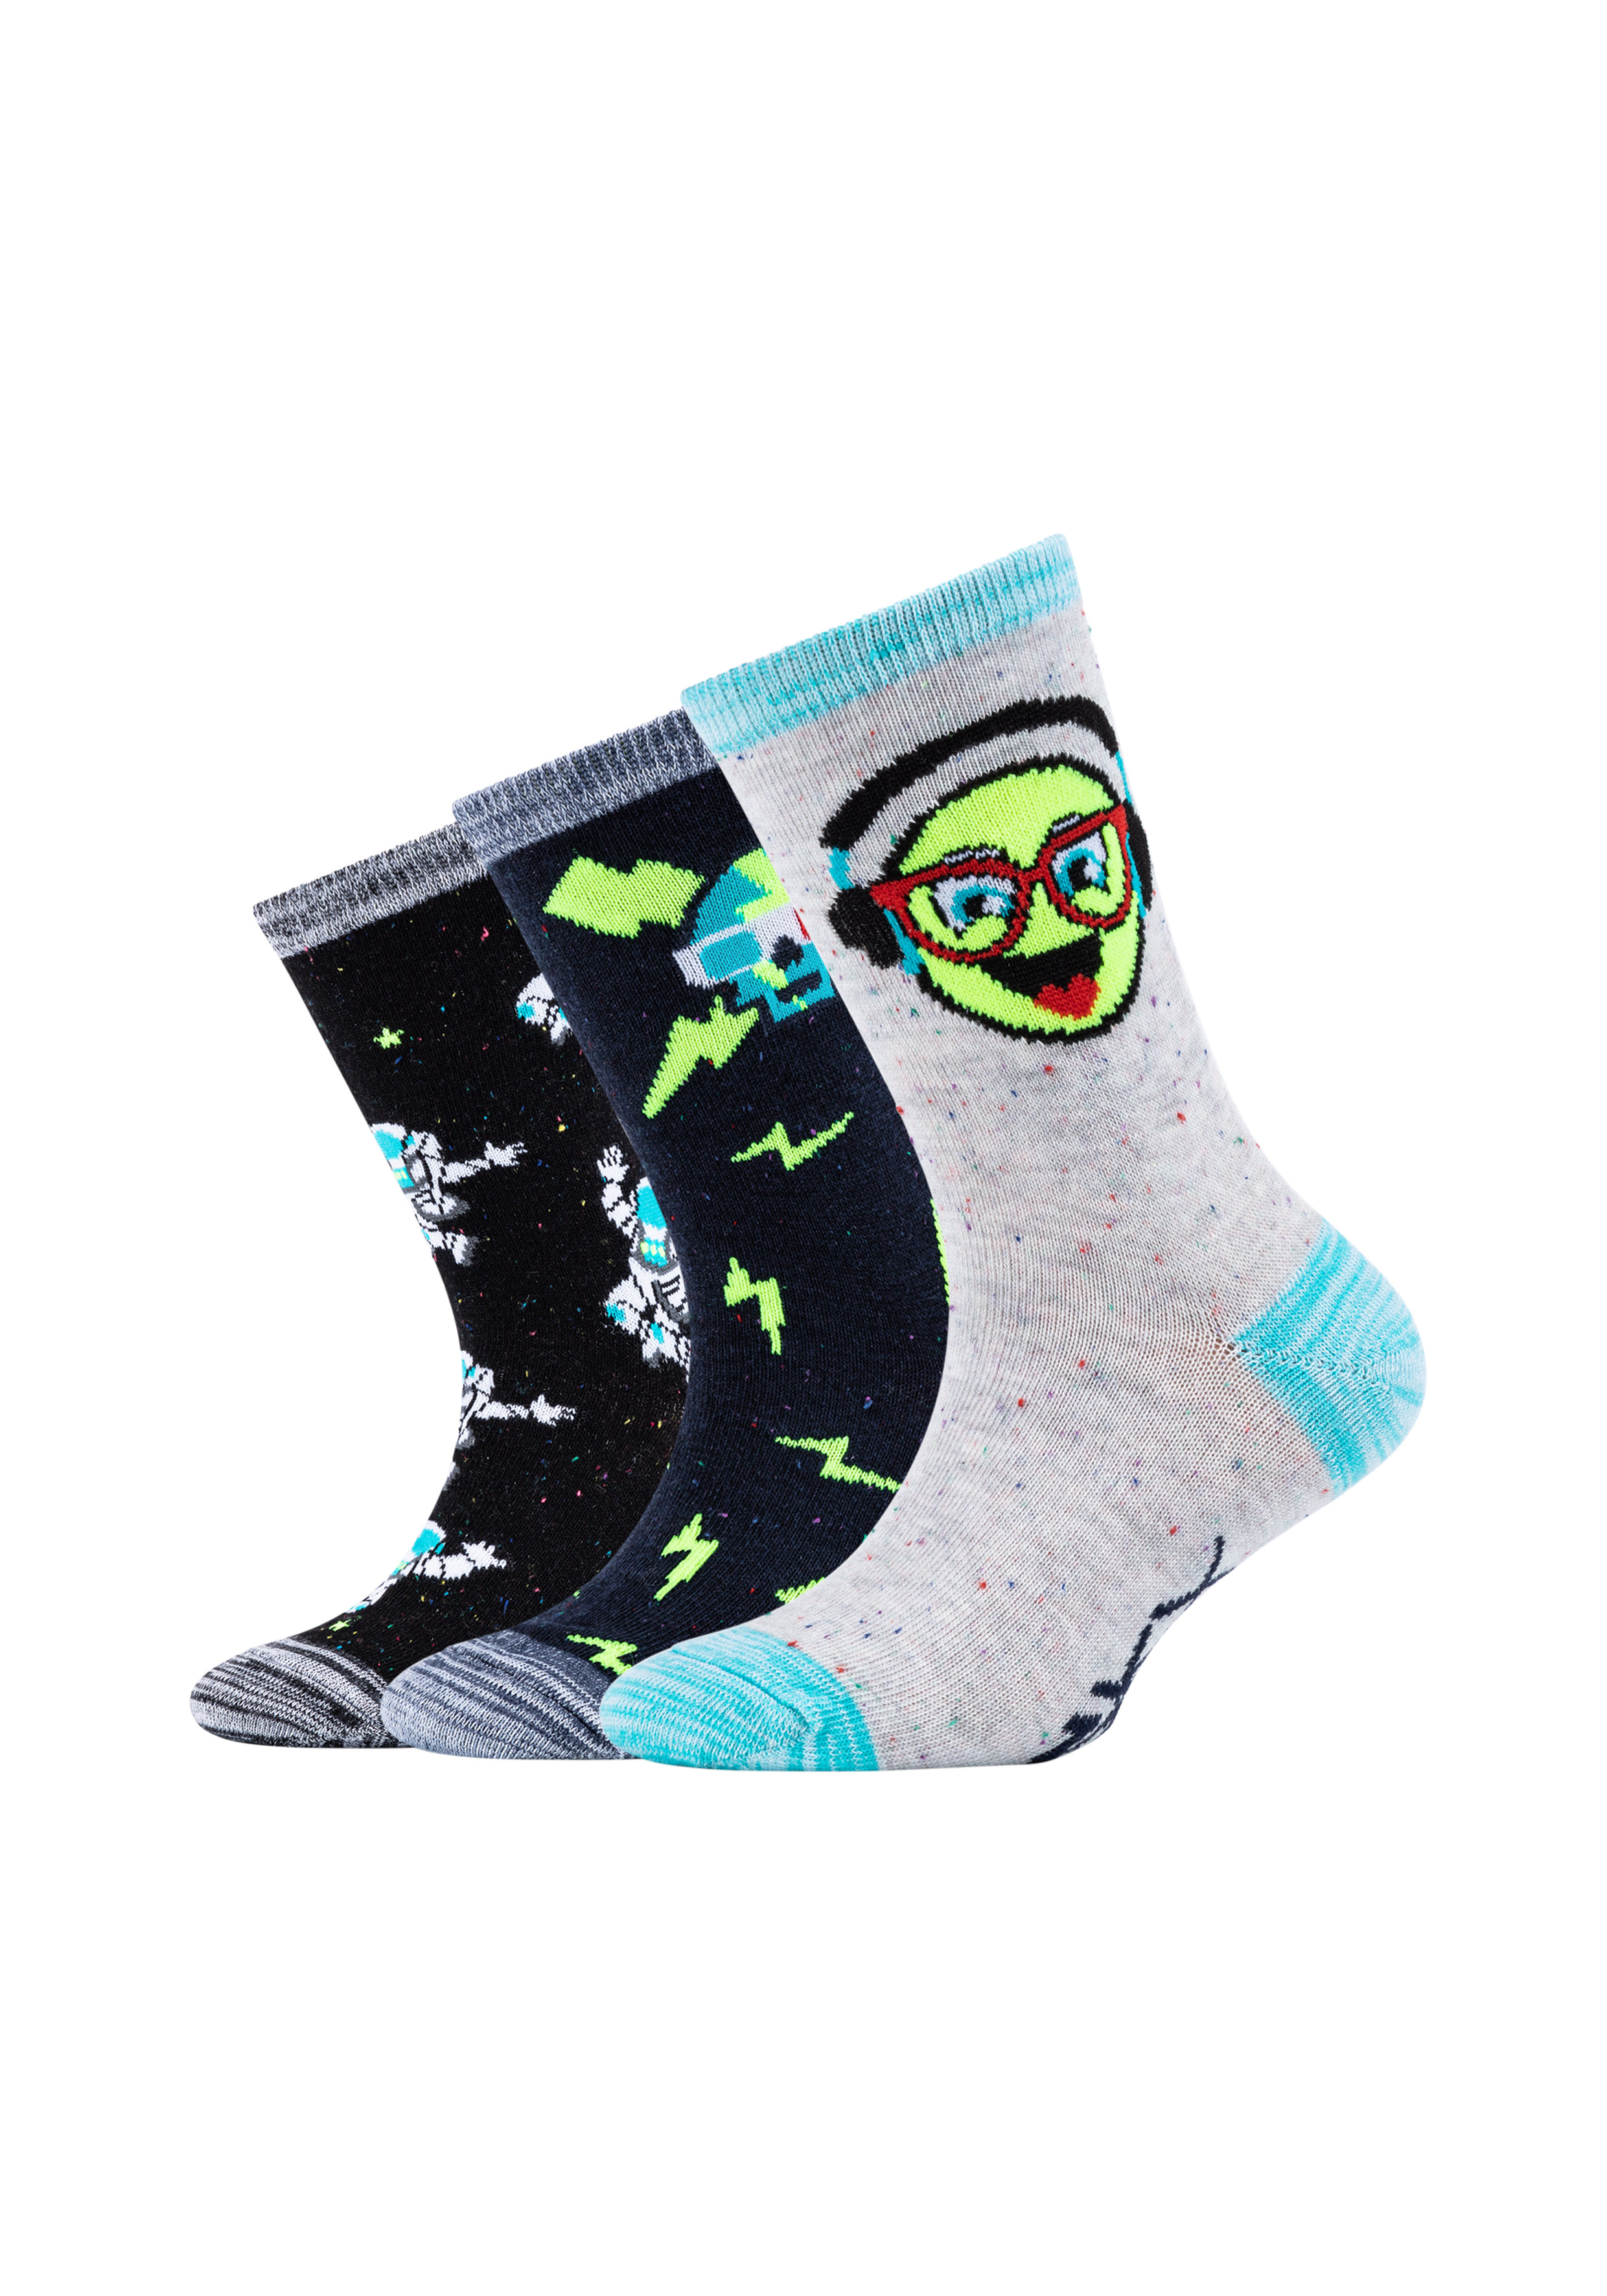 Boys casual space and smileys Socks 3p